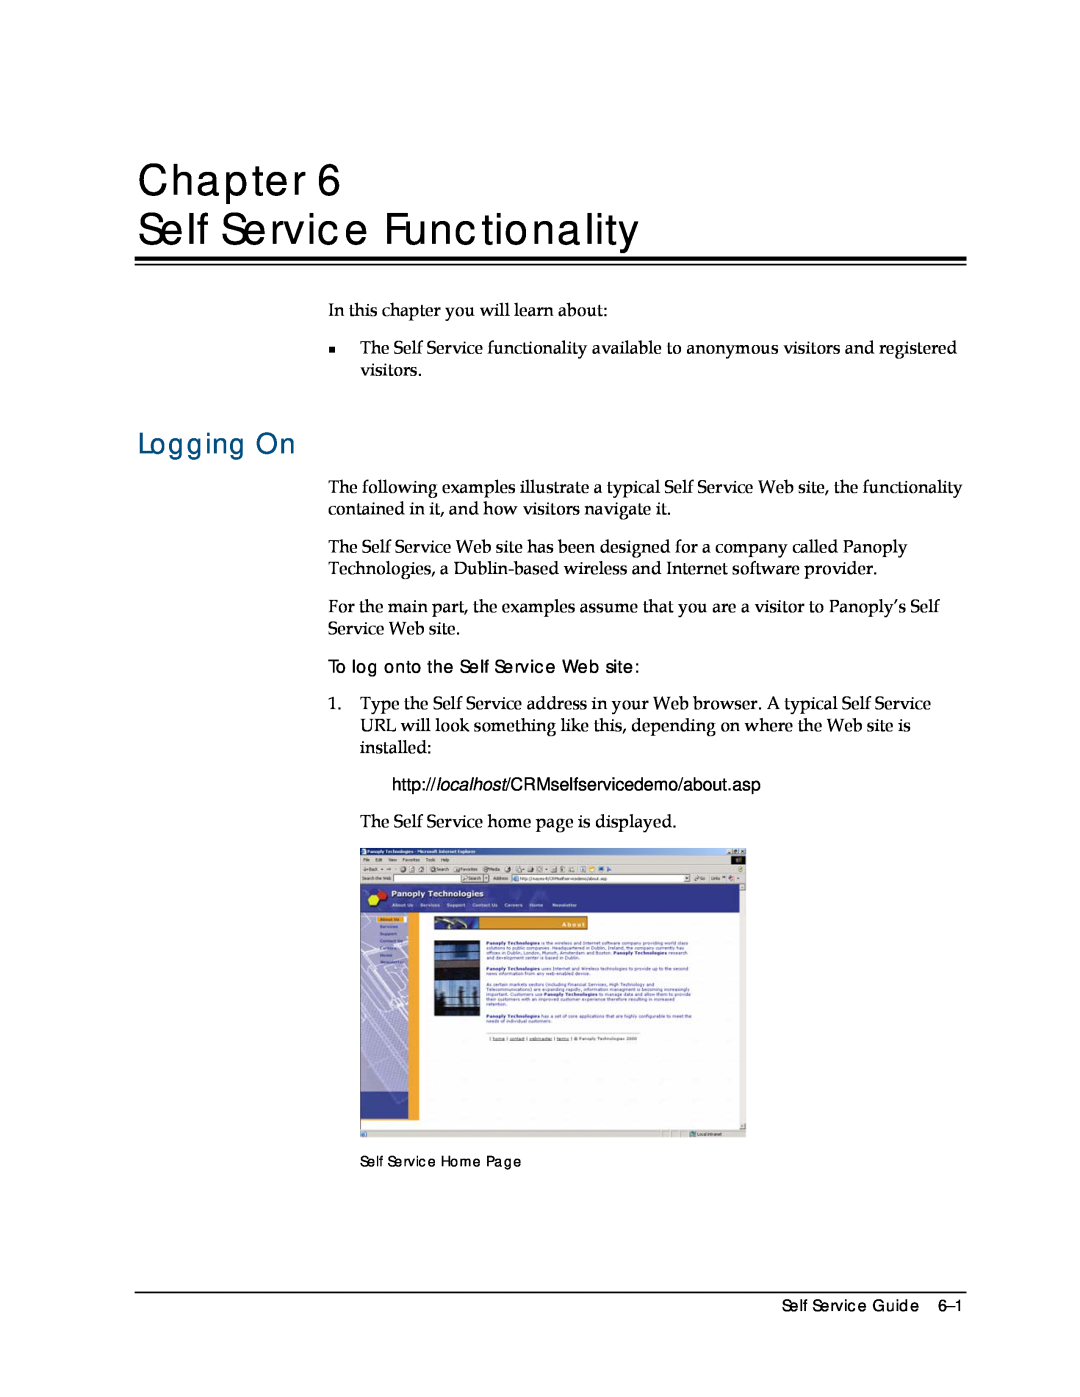 Sage Software 5.8 manual Chapter Self Service Functionality, Logging On 